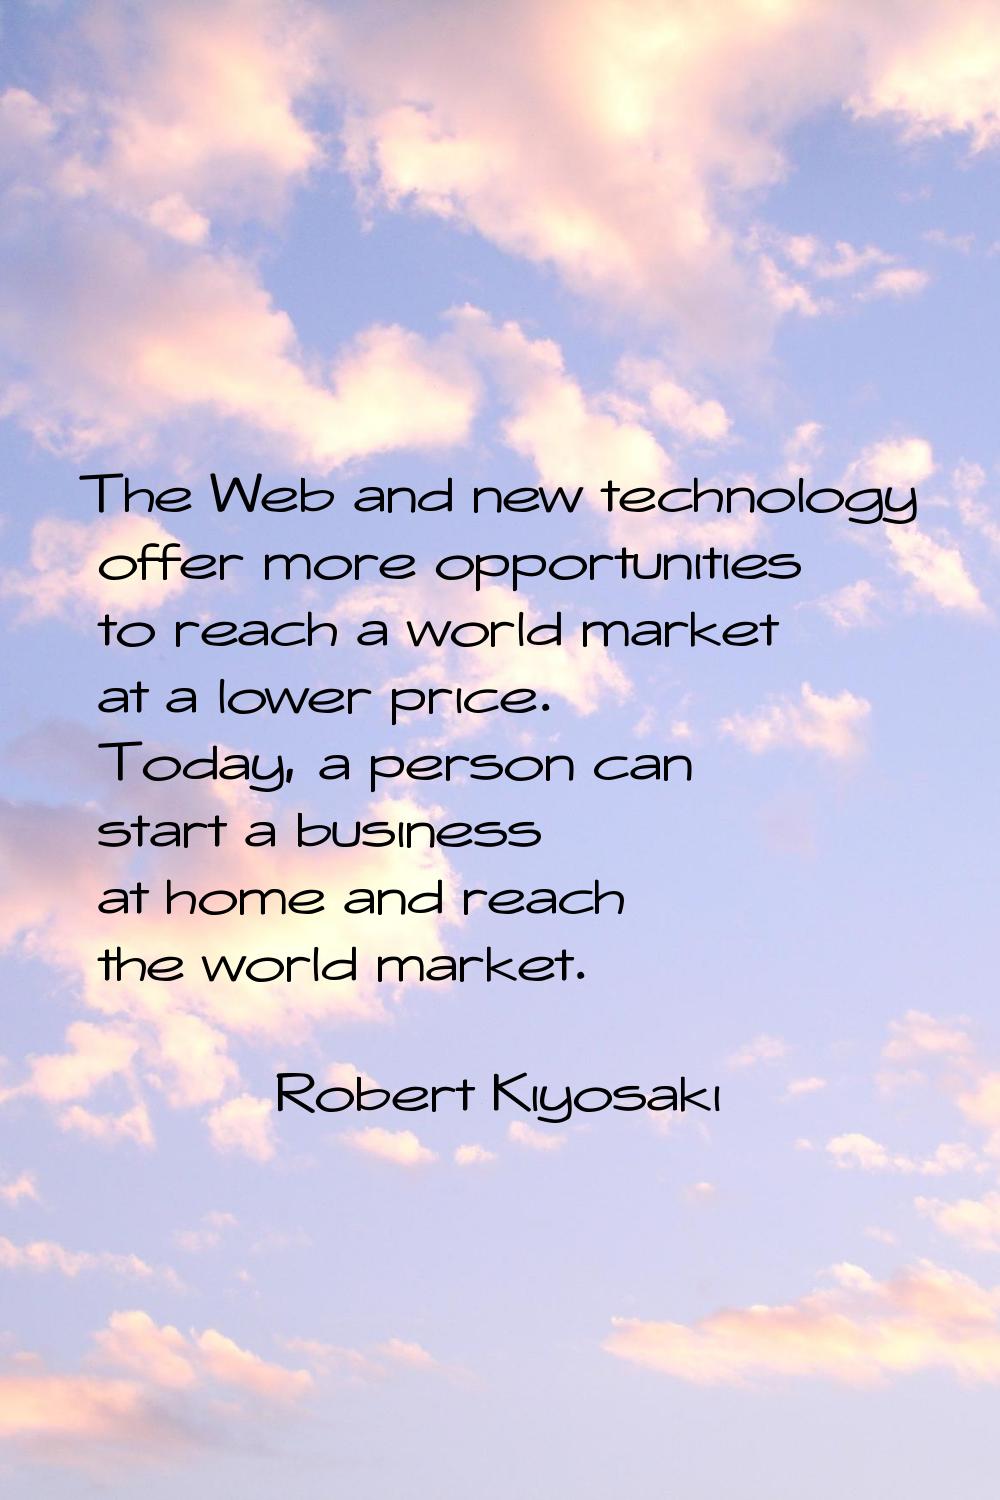 The Web and new technology offer more opportunities to reach a world market at a lower price. Today